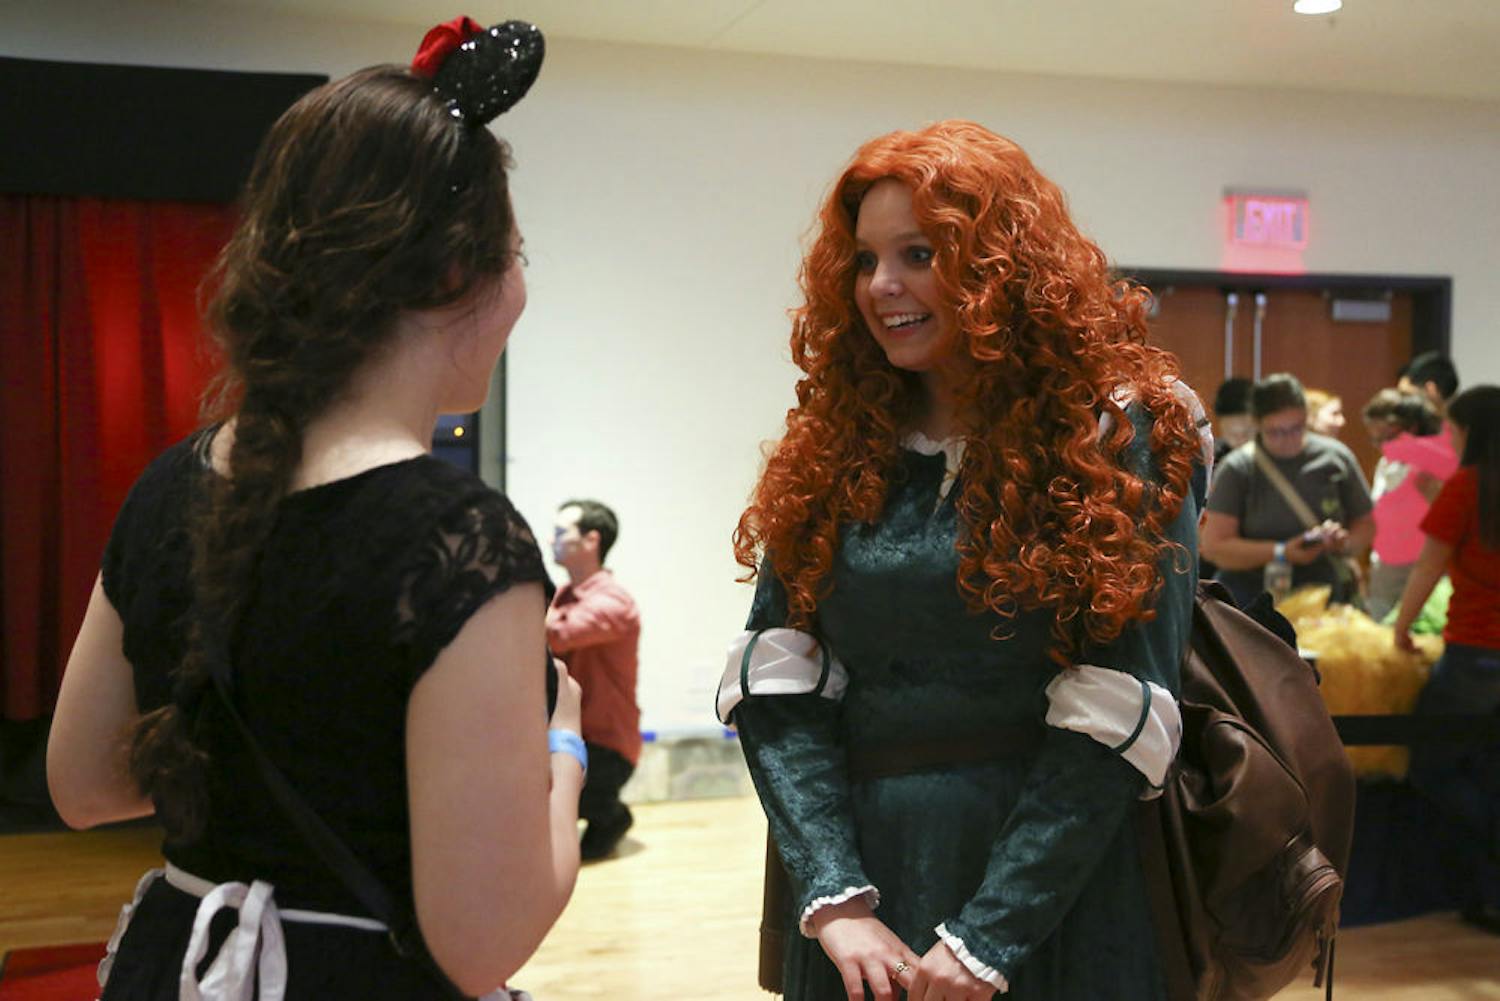 At the third annual Reitz Union Disney event, Magic Through the Ages, students dressed up as Disney characters and participated in Disney-themed activities. 